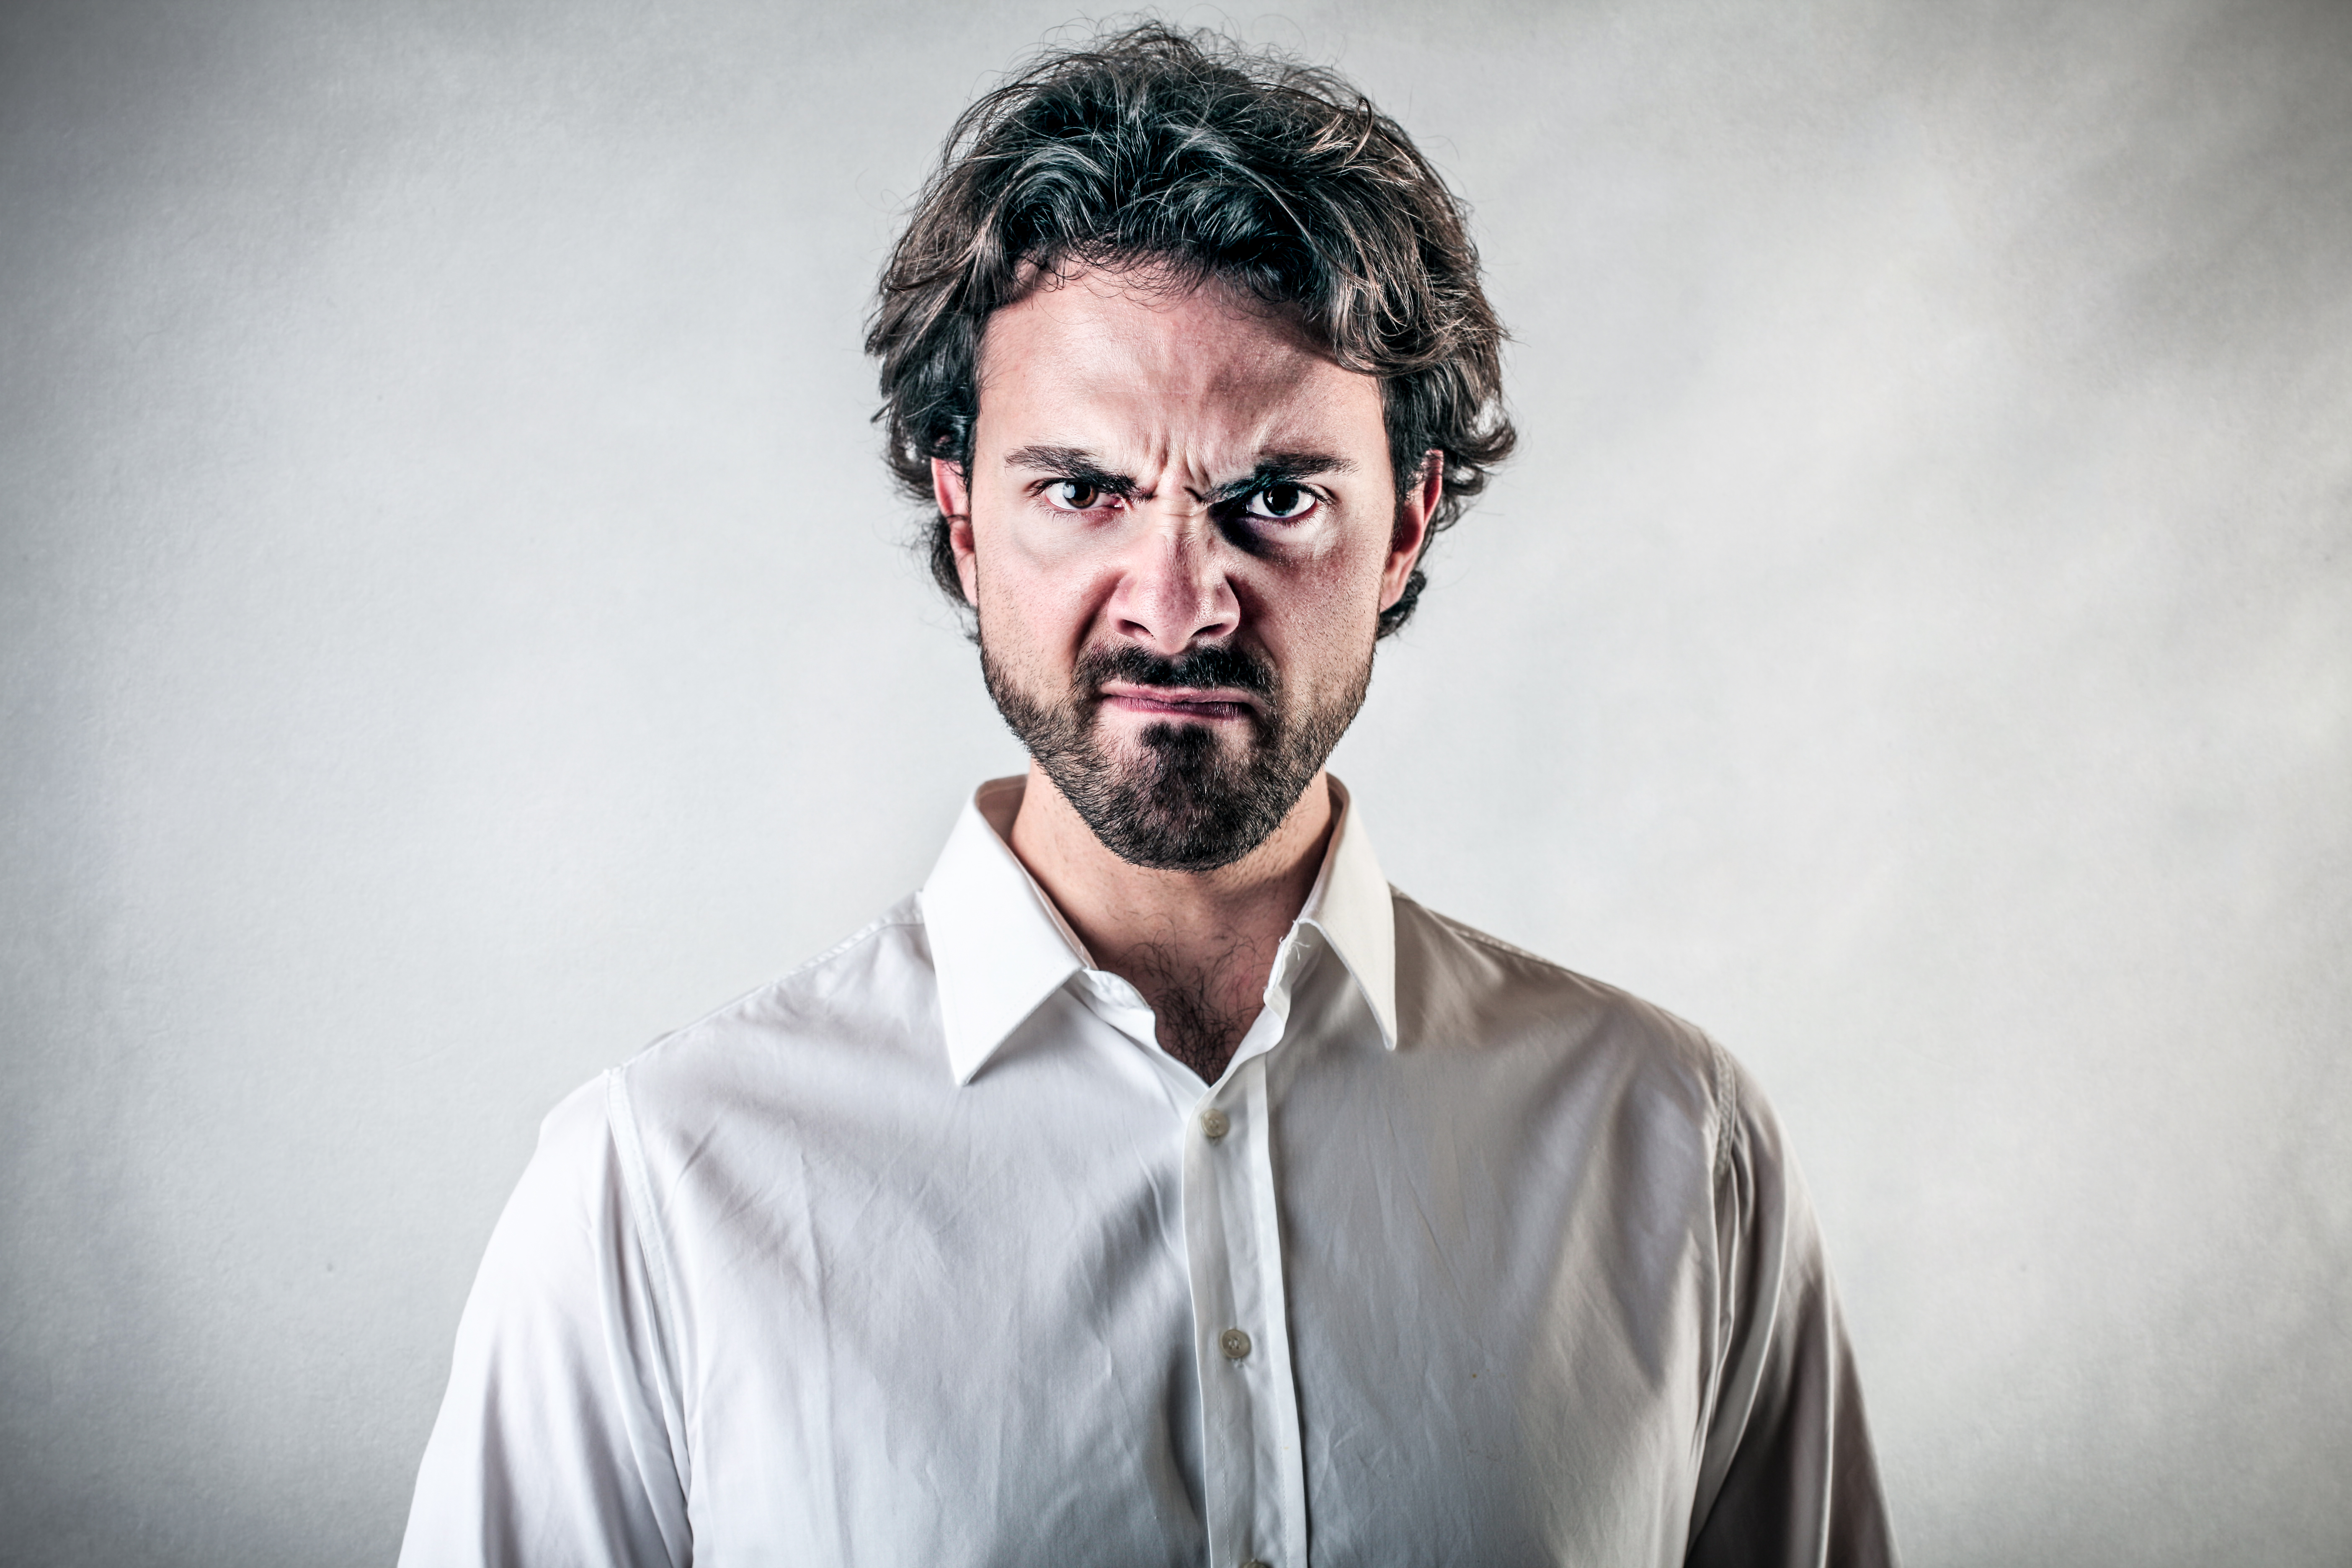 Angry man | Shutterstock